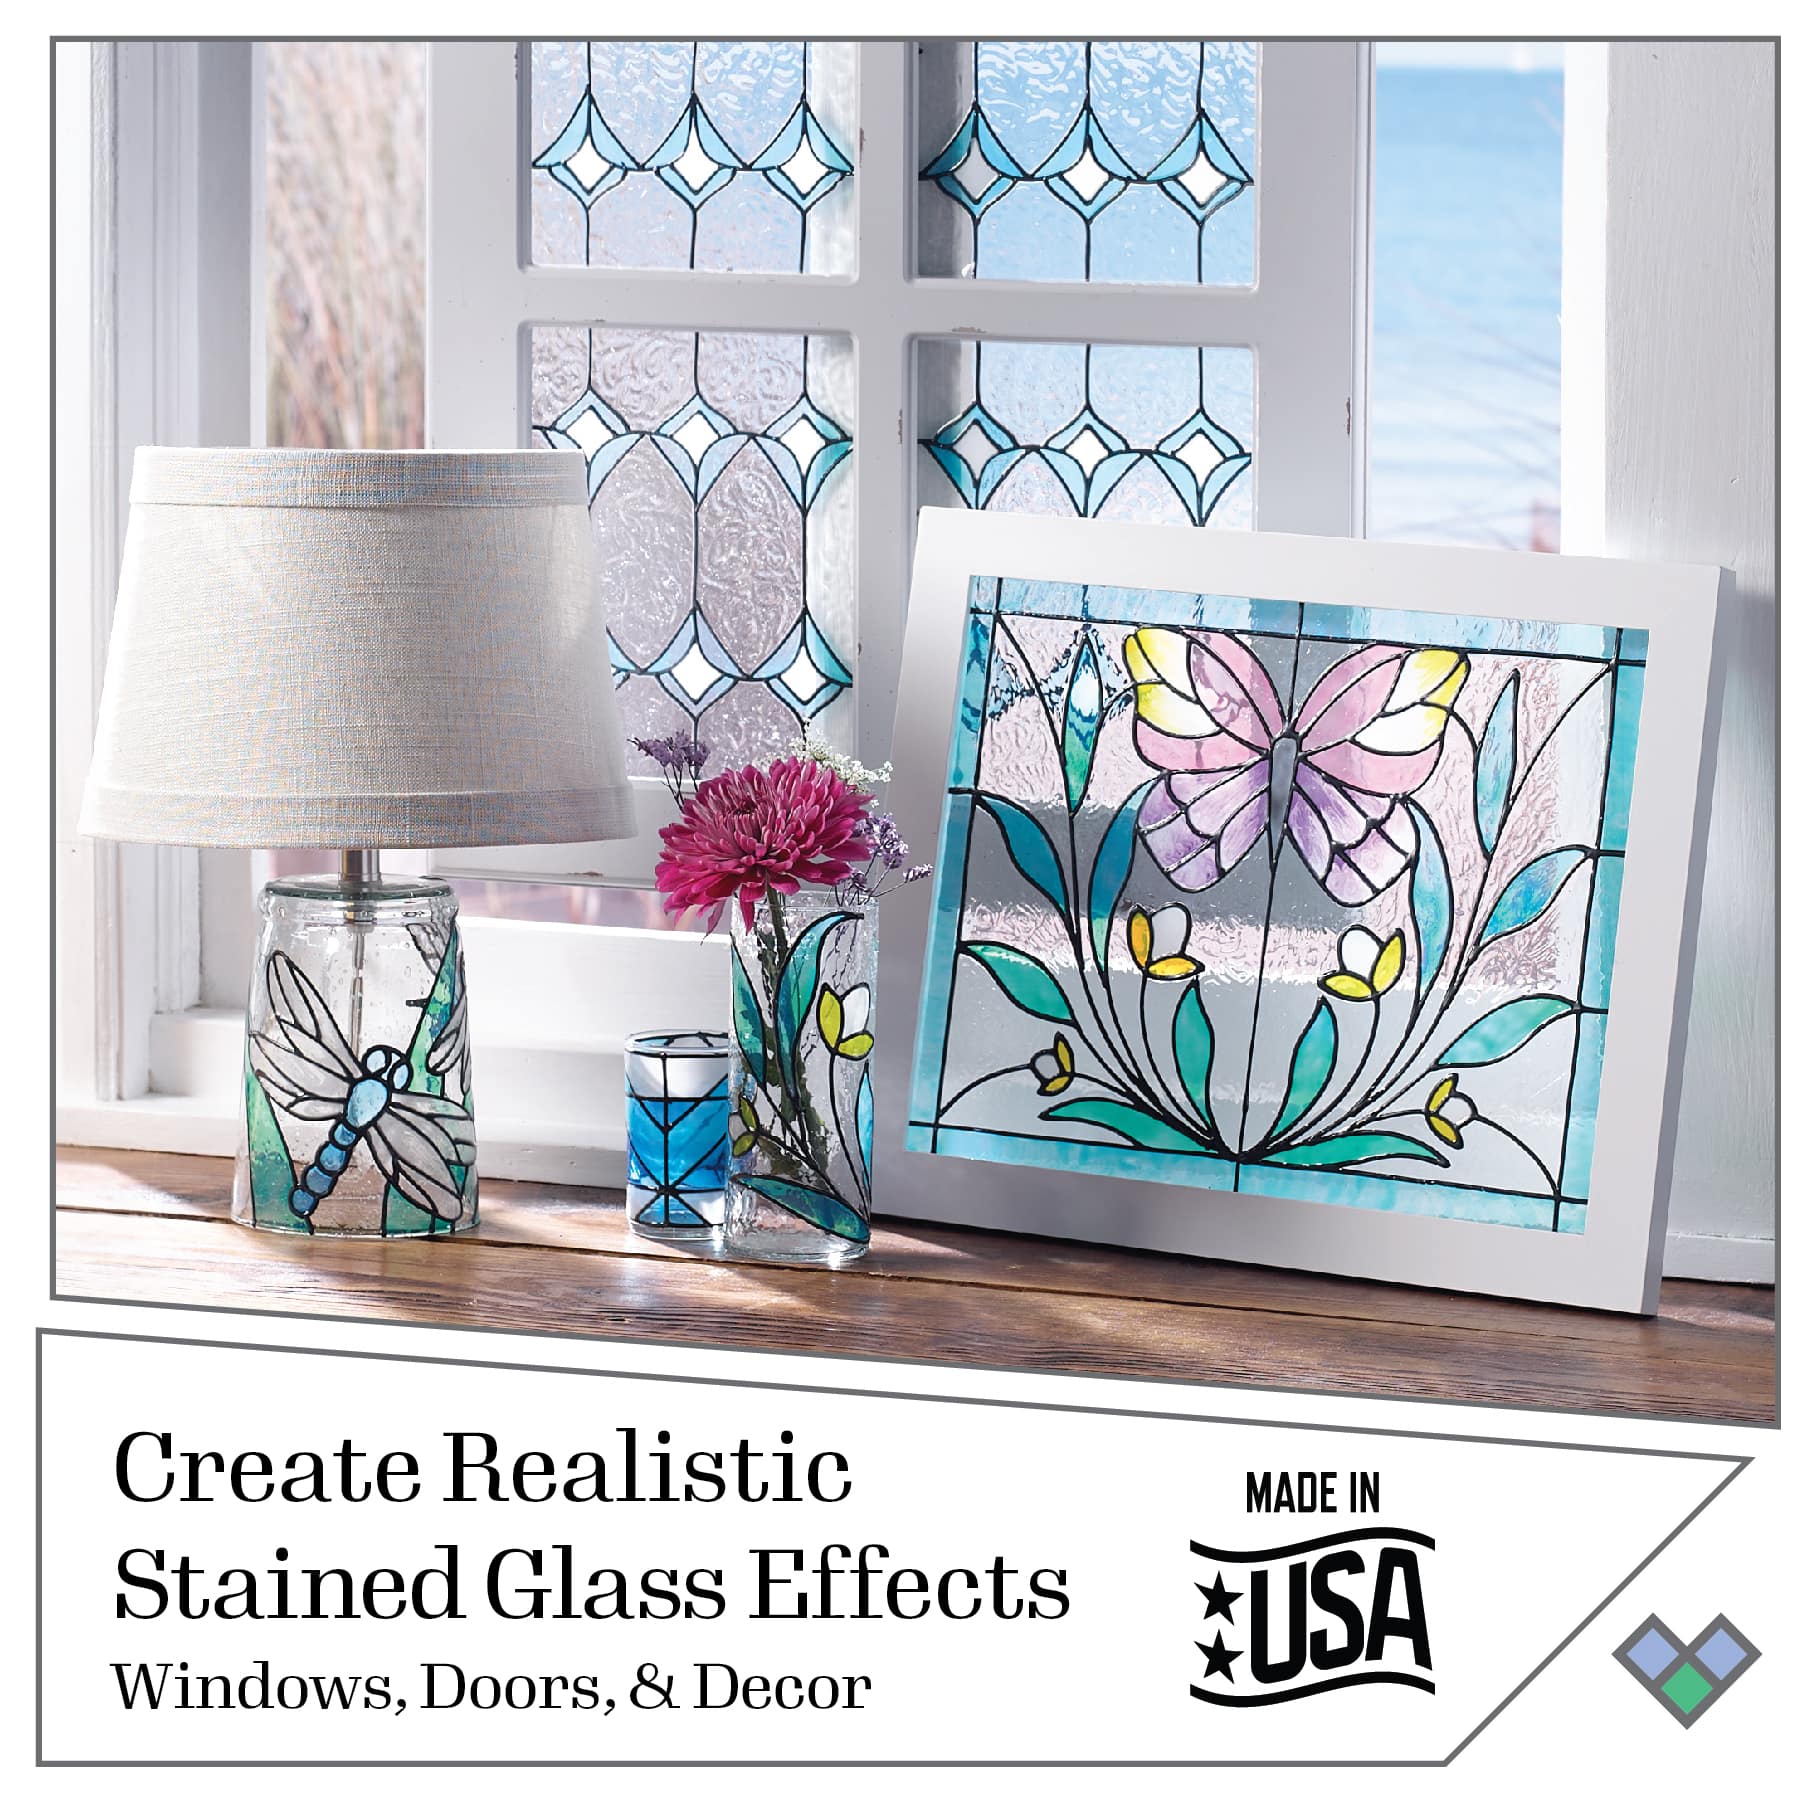 Plaid&#xAE; Gallery Glass&#xAE; Stained Glass Effect Paint, 2oz.